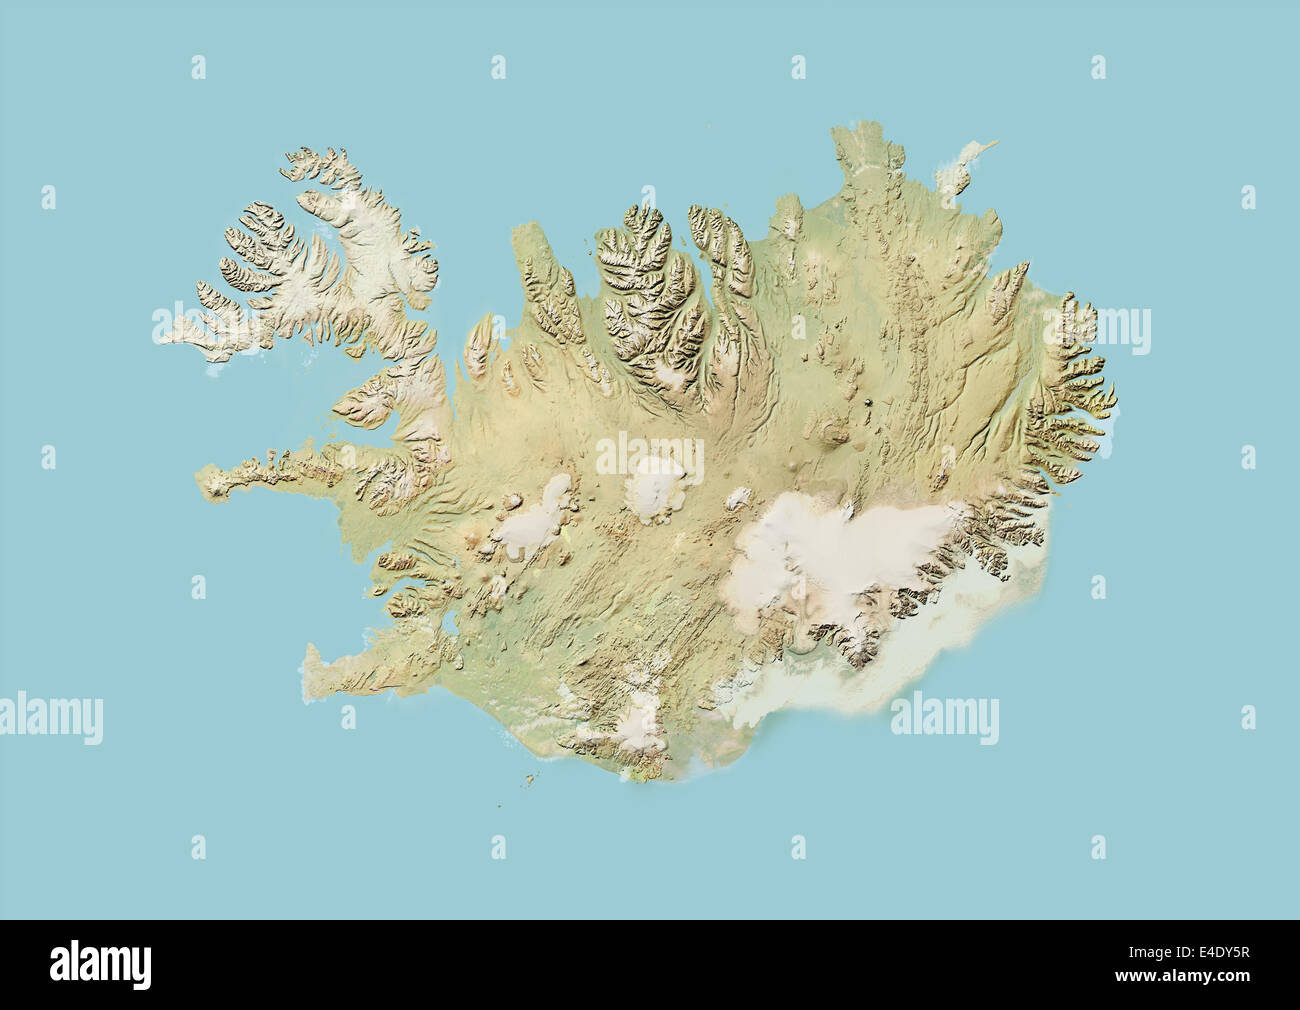 Iceland, Relief Map Stock Photo